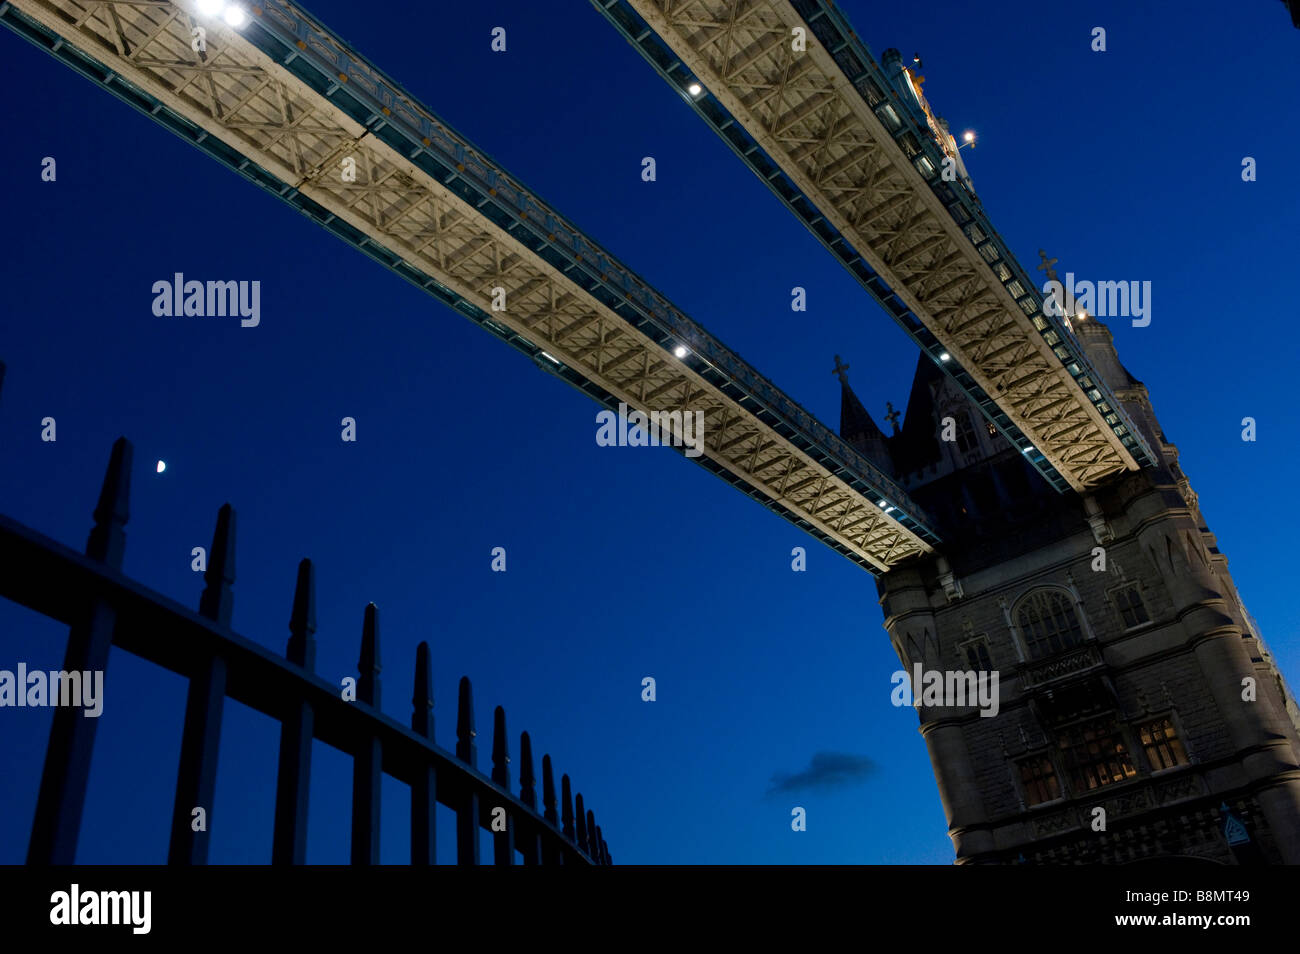 Tower Bridge on the Thames in London at night with the moon The bridge opens for shipping to go through Stock Photo